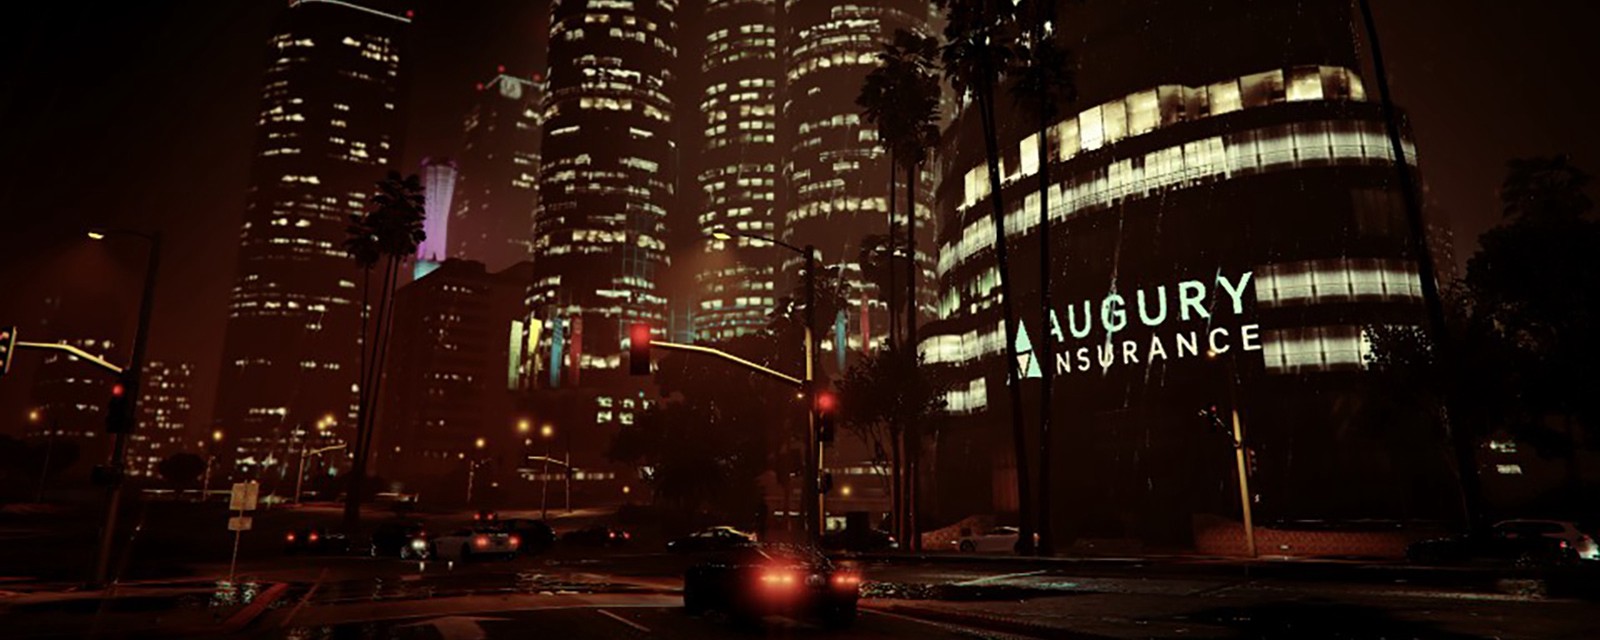 An in-game nighttime city scene of office buildings and street lights.